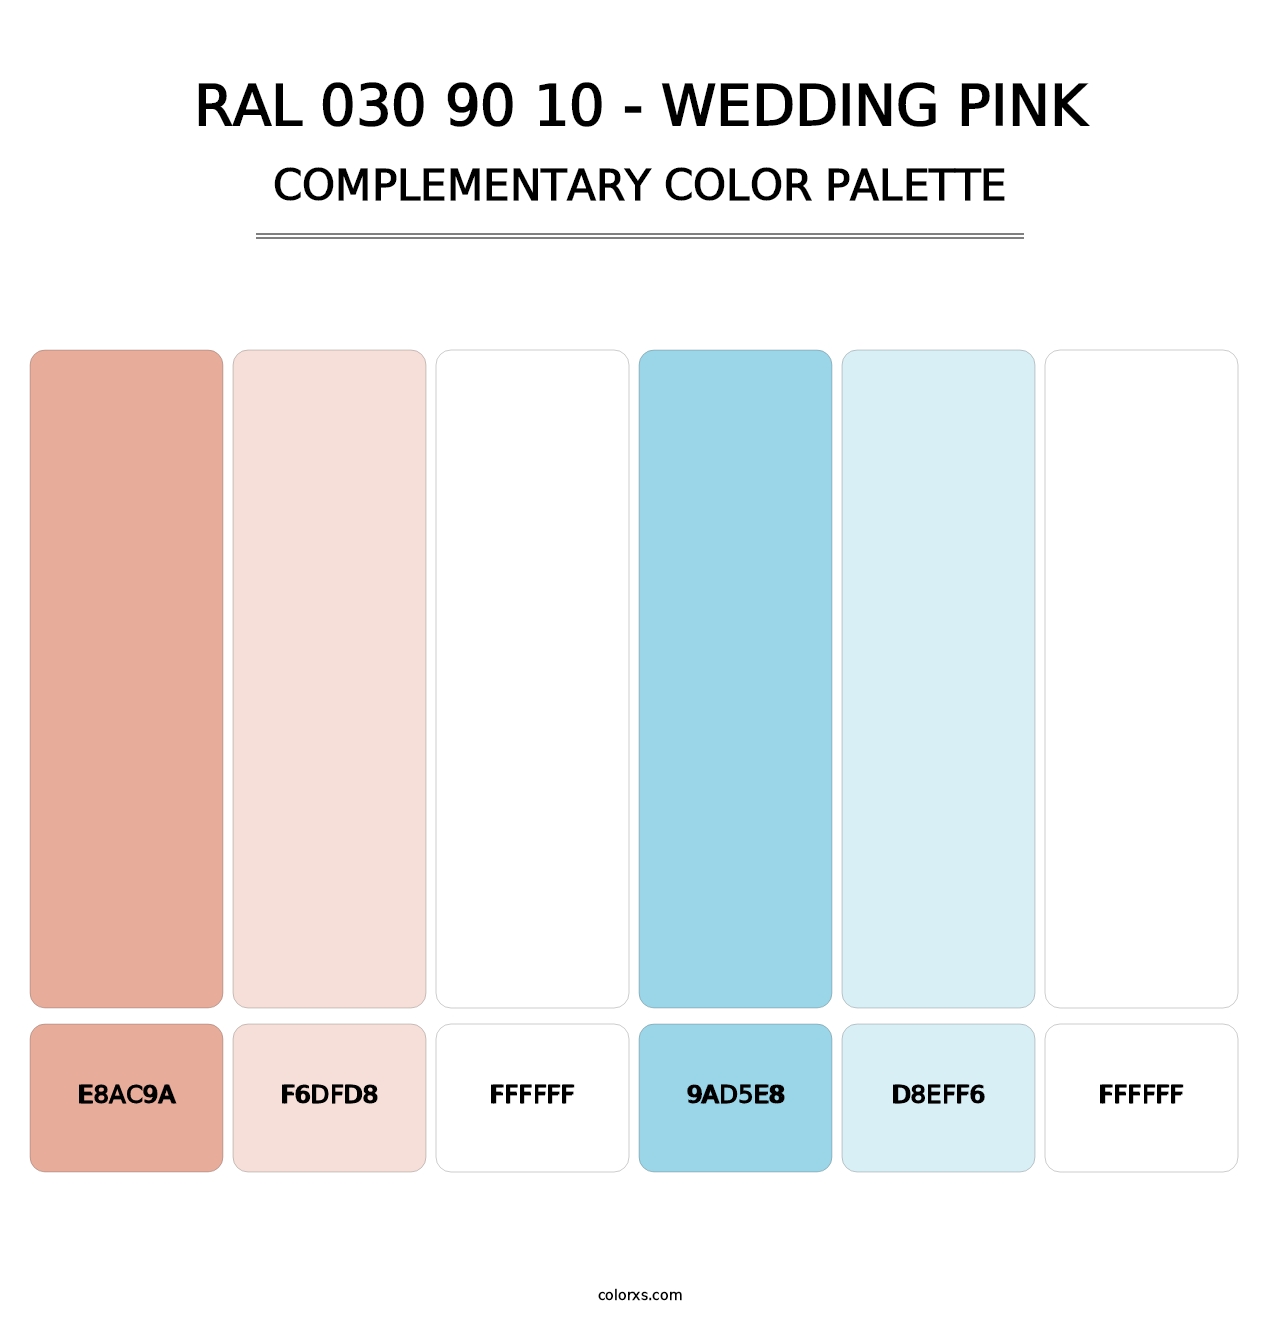 RAL 030 90 10 - Wedding Pink - Complementary Color Palette